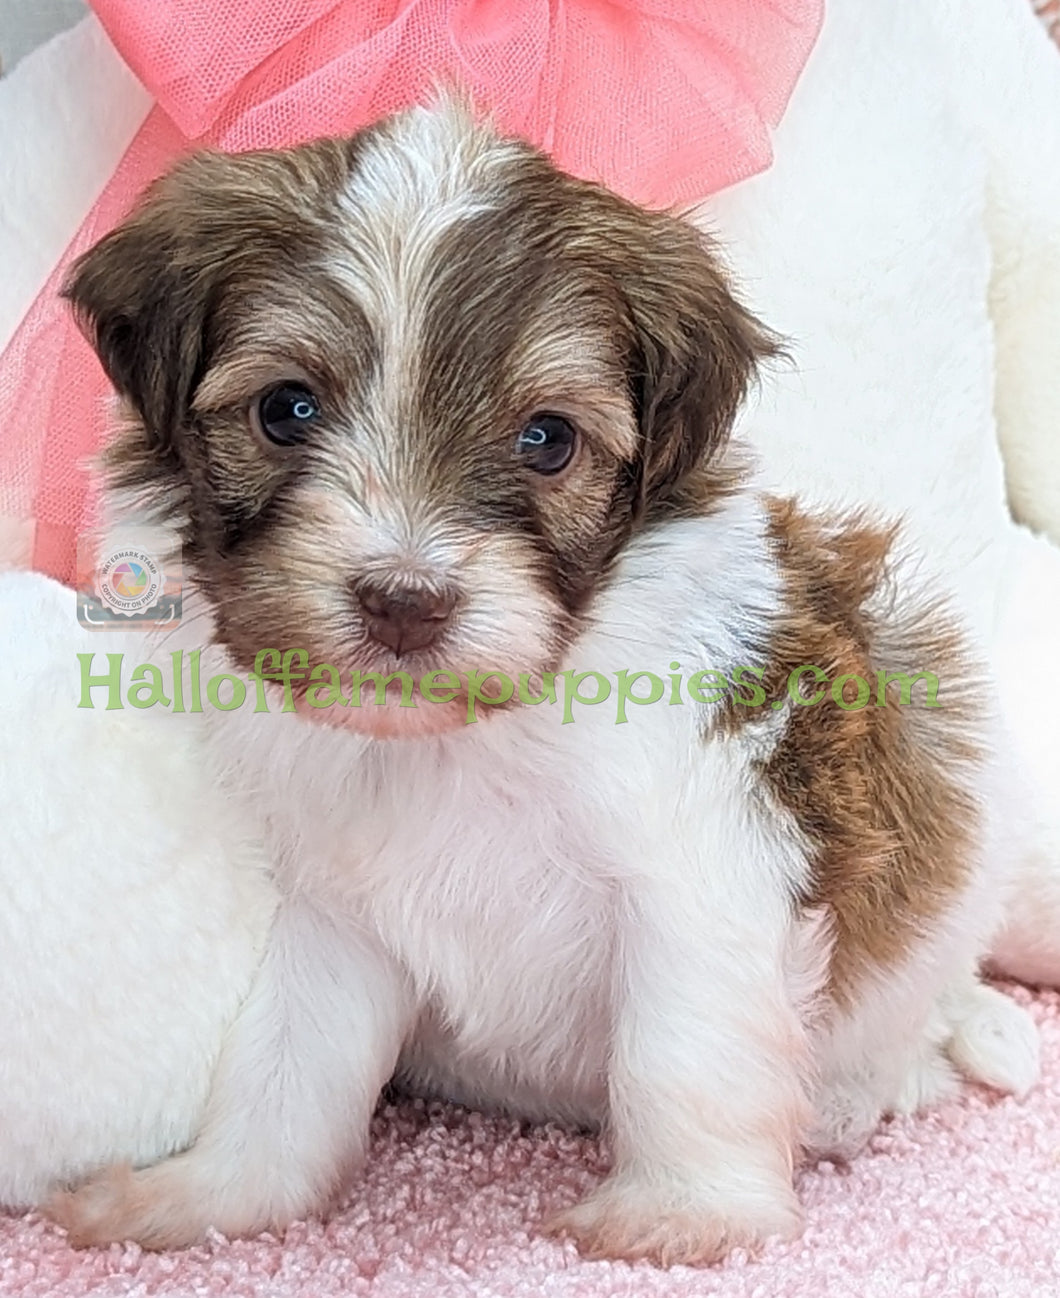 Paisley - A Hypoallergenic Havanese Puppy - has found her new loving home!